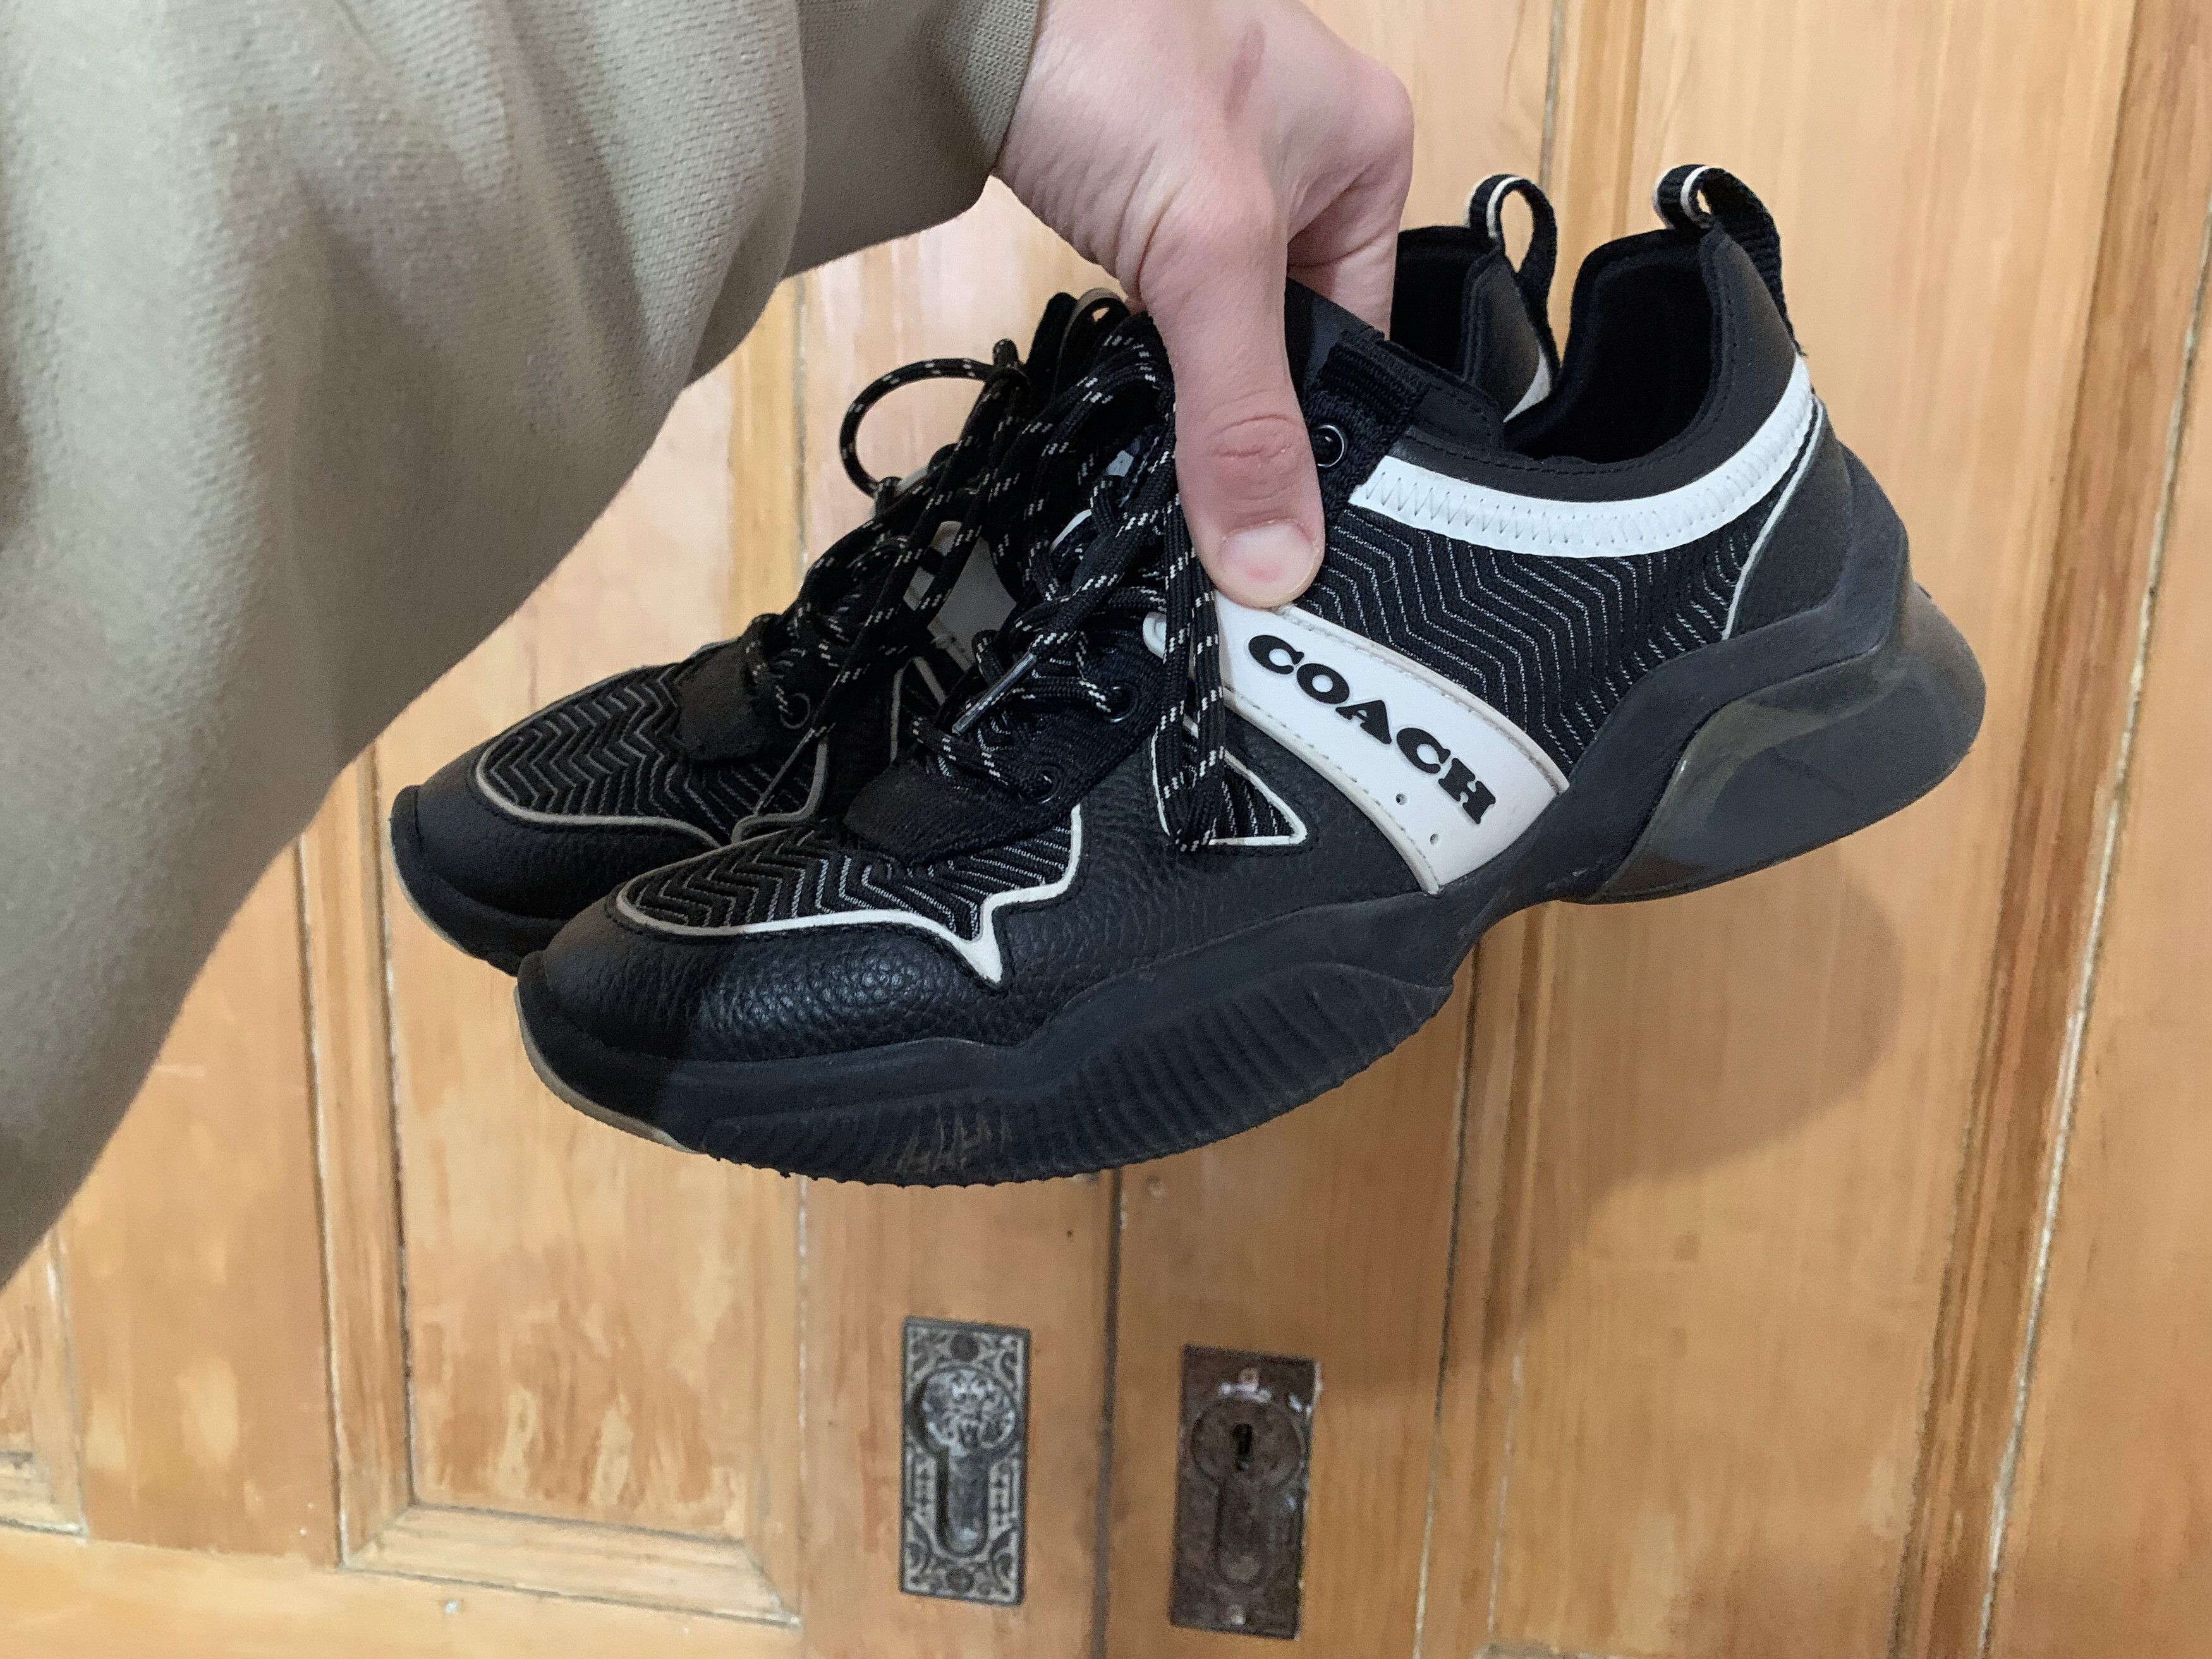 Coach Black and White Coach Athleissure Sneakers Size US 9 / EU 42 - 1 Preview